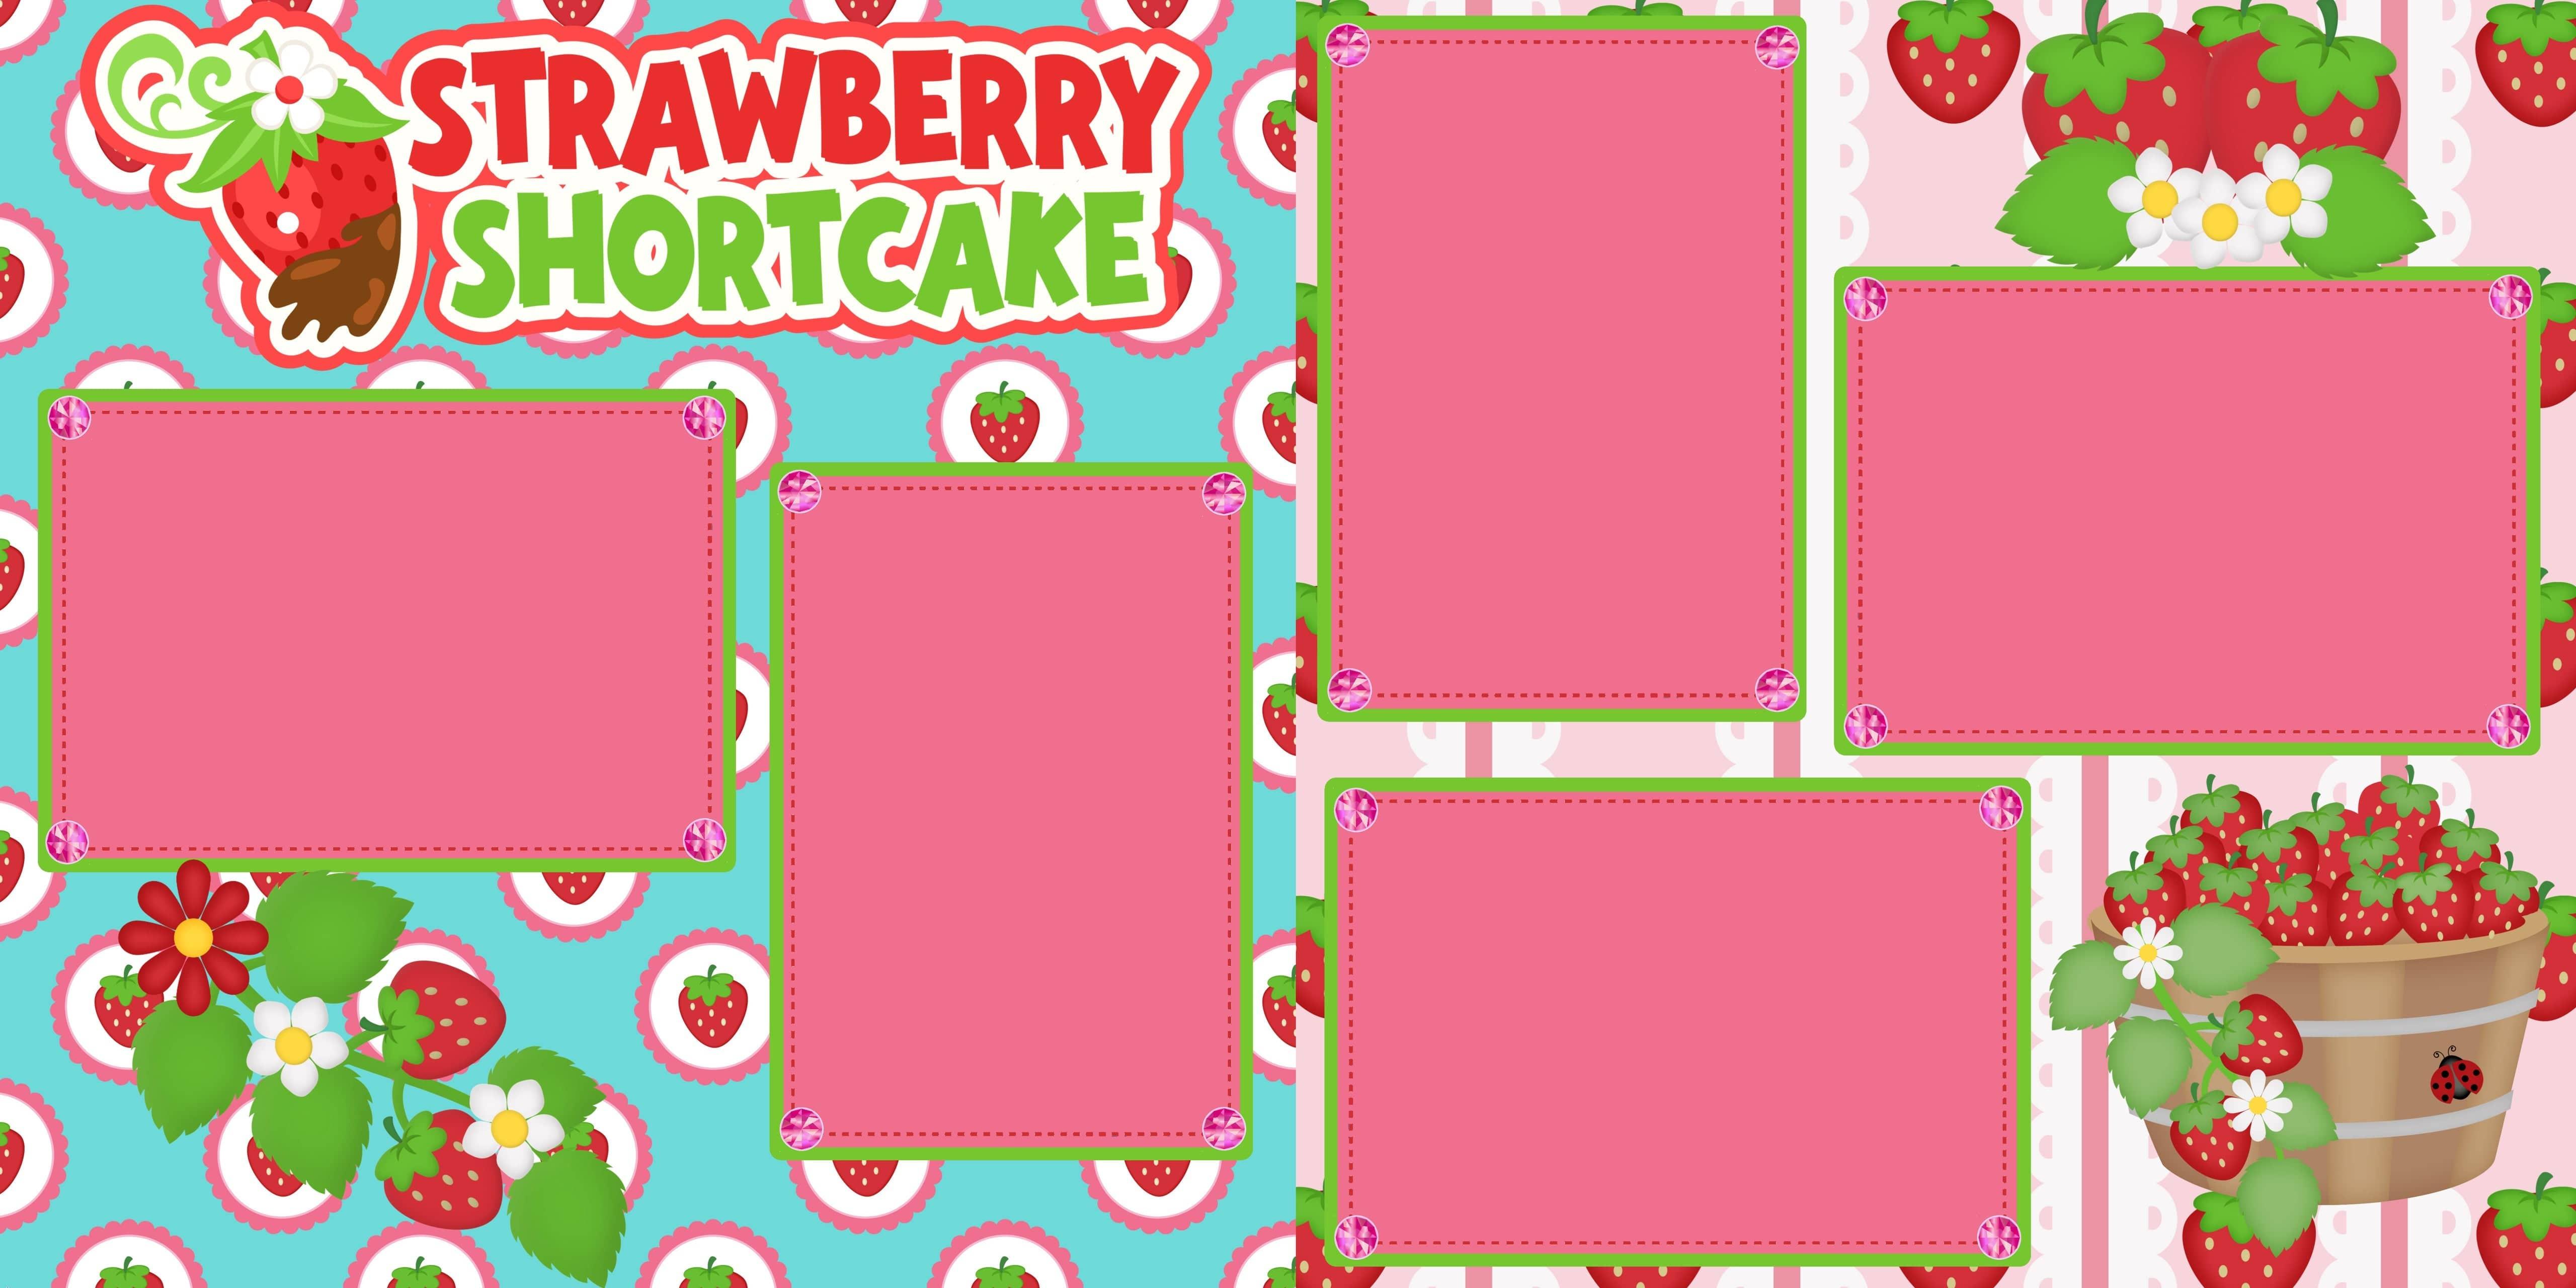 Strawberry Shortcake (2) - 12 x 12 Premade, Printed Scrapbook Pages by SSC Designs